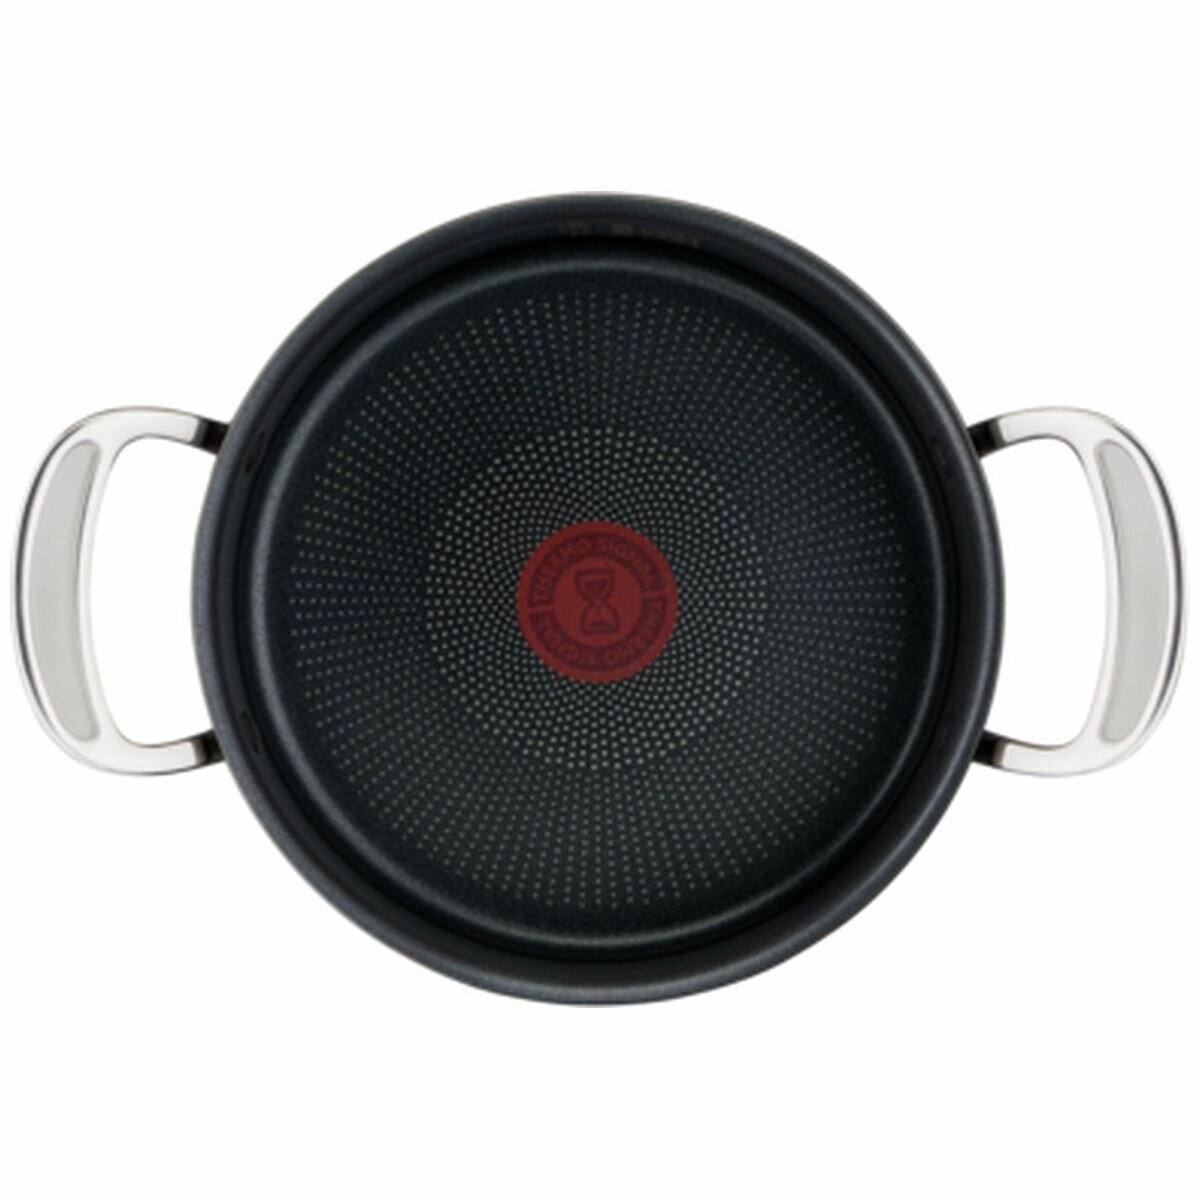 Tefal Jamie Oliver Cooks Classic Induction Non-Stick Hard Anodised